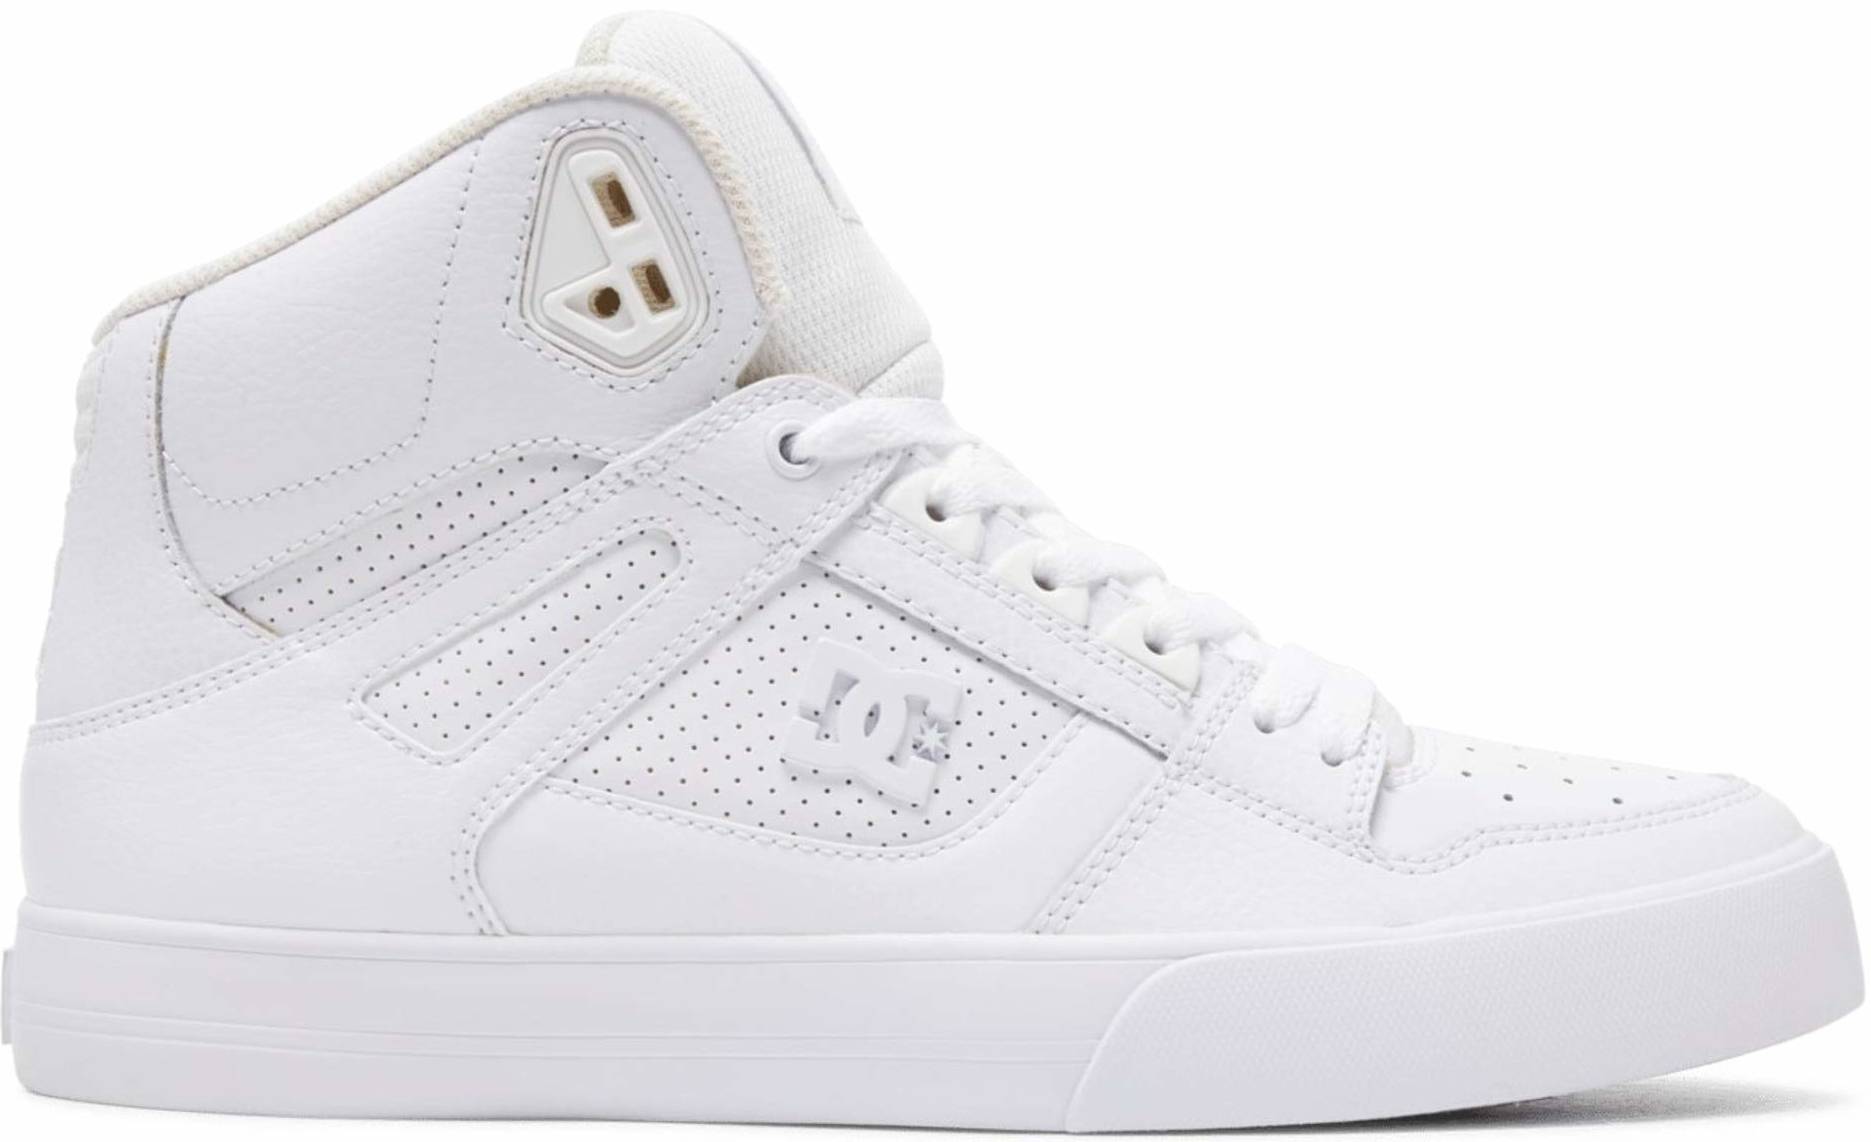 Save 35% on White High Top Sneakers (52 